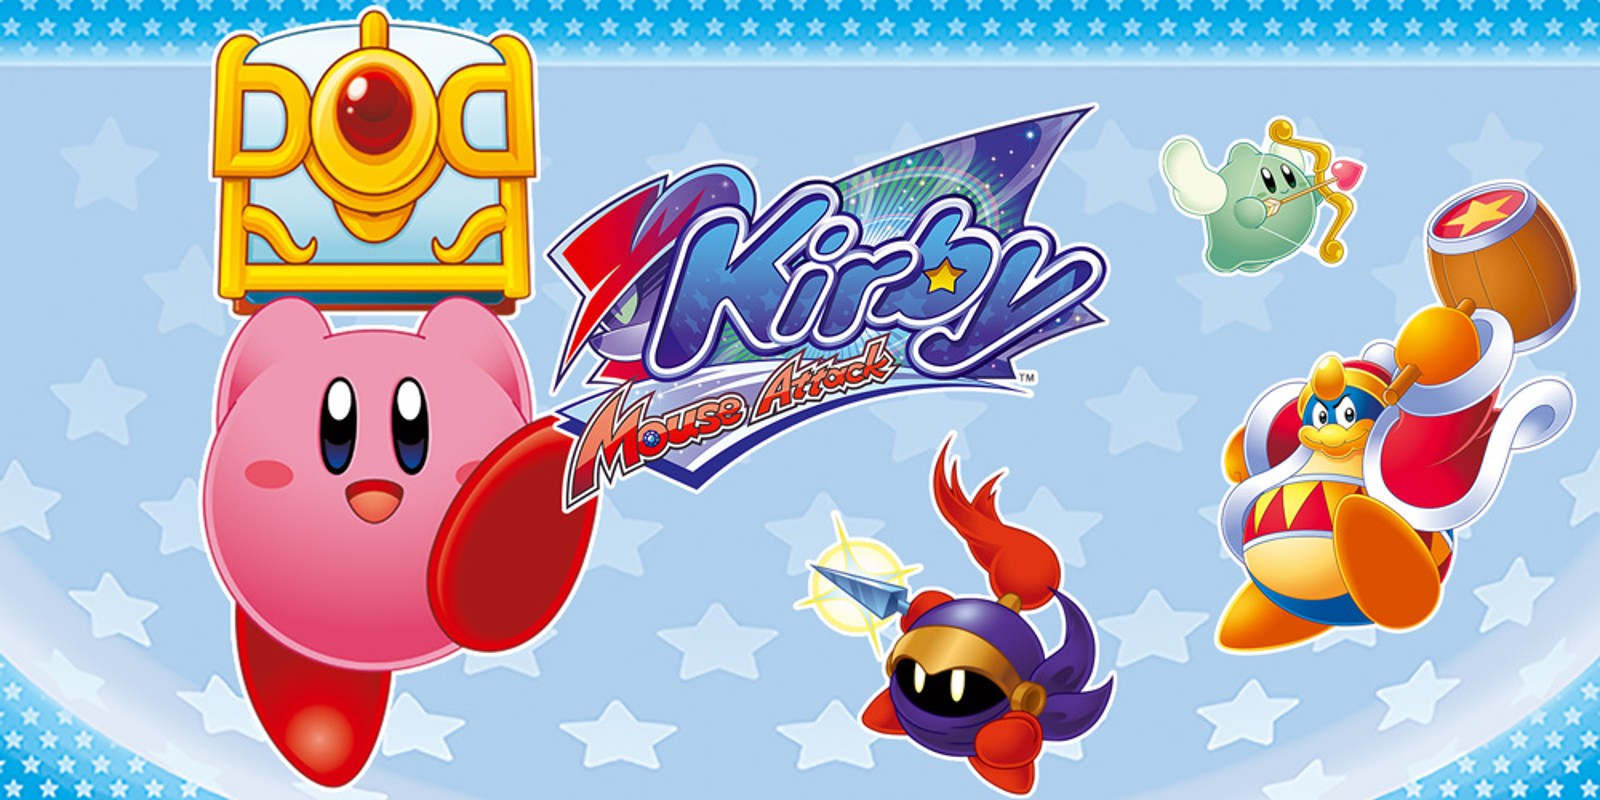 Kirby: Topi all' attacco